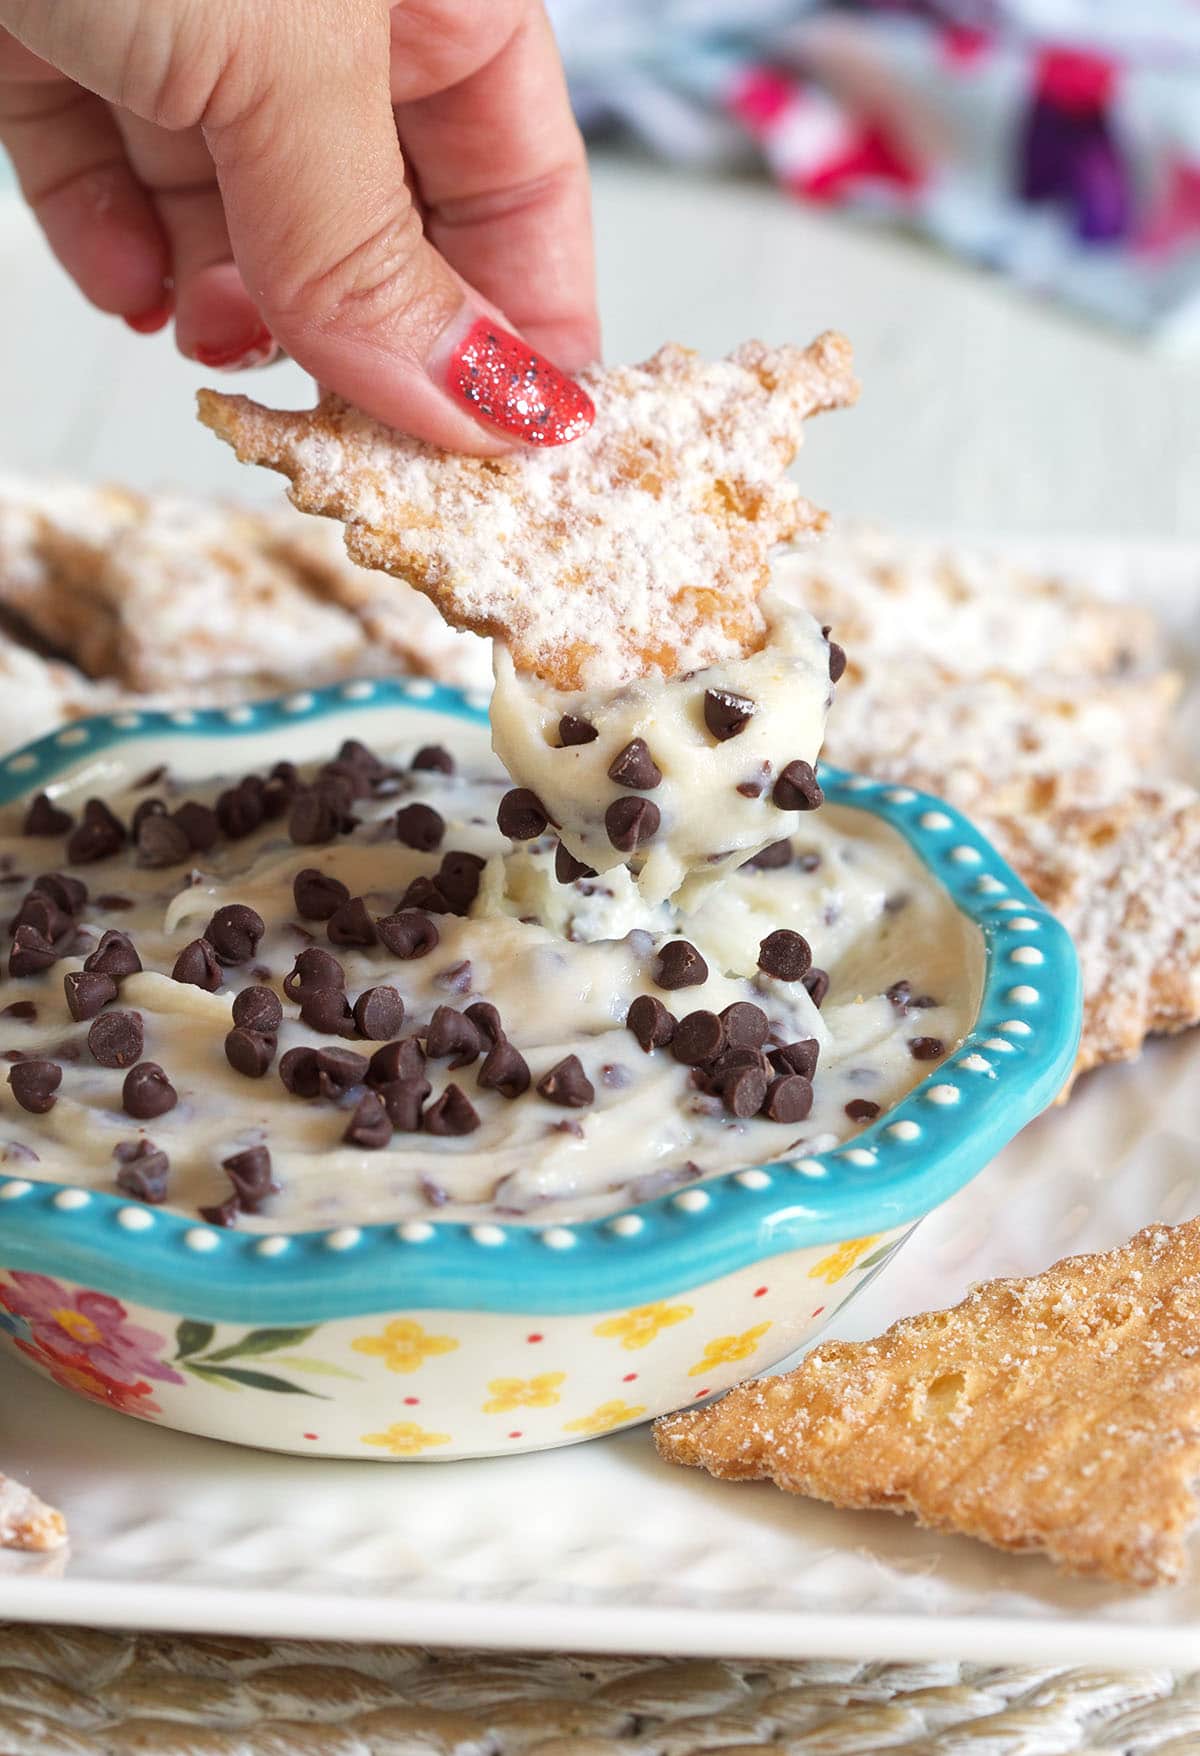 A hand is dipping a cannoli shell into the dip.